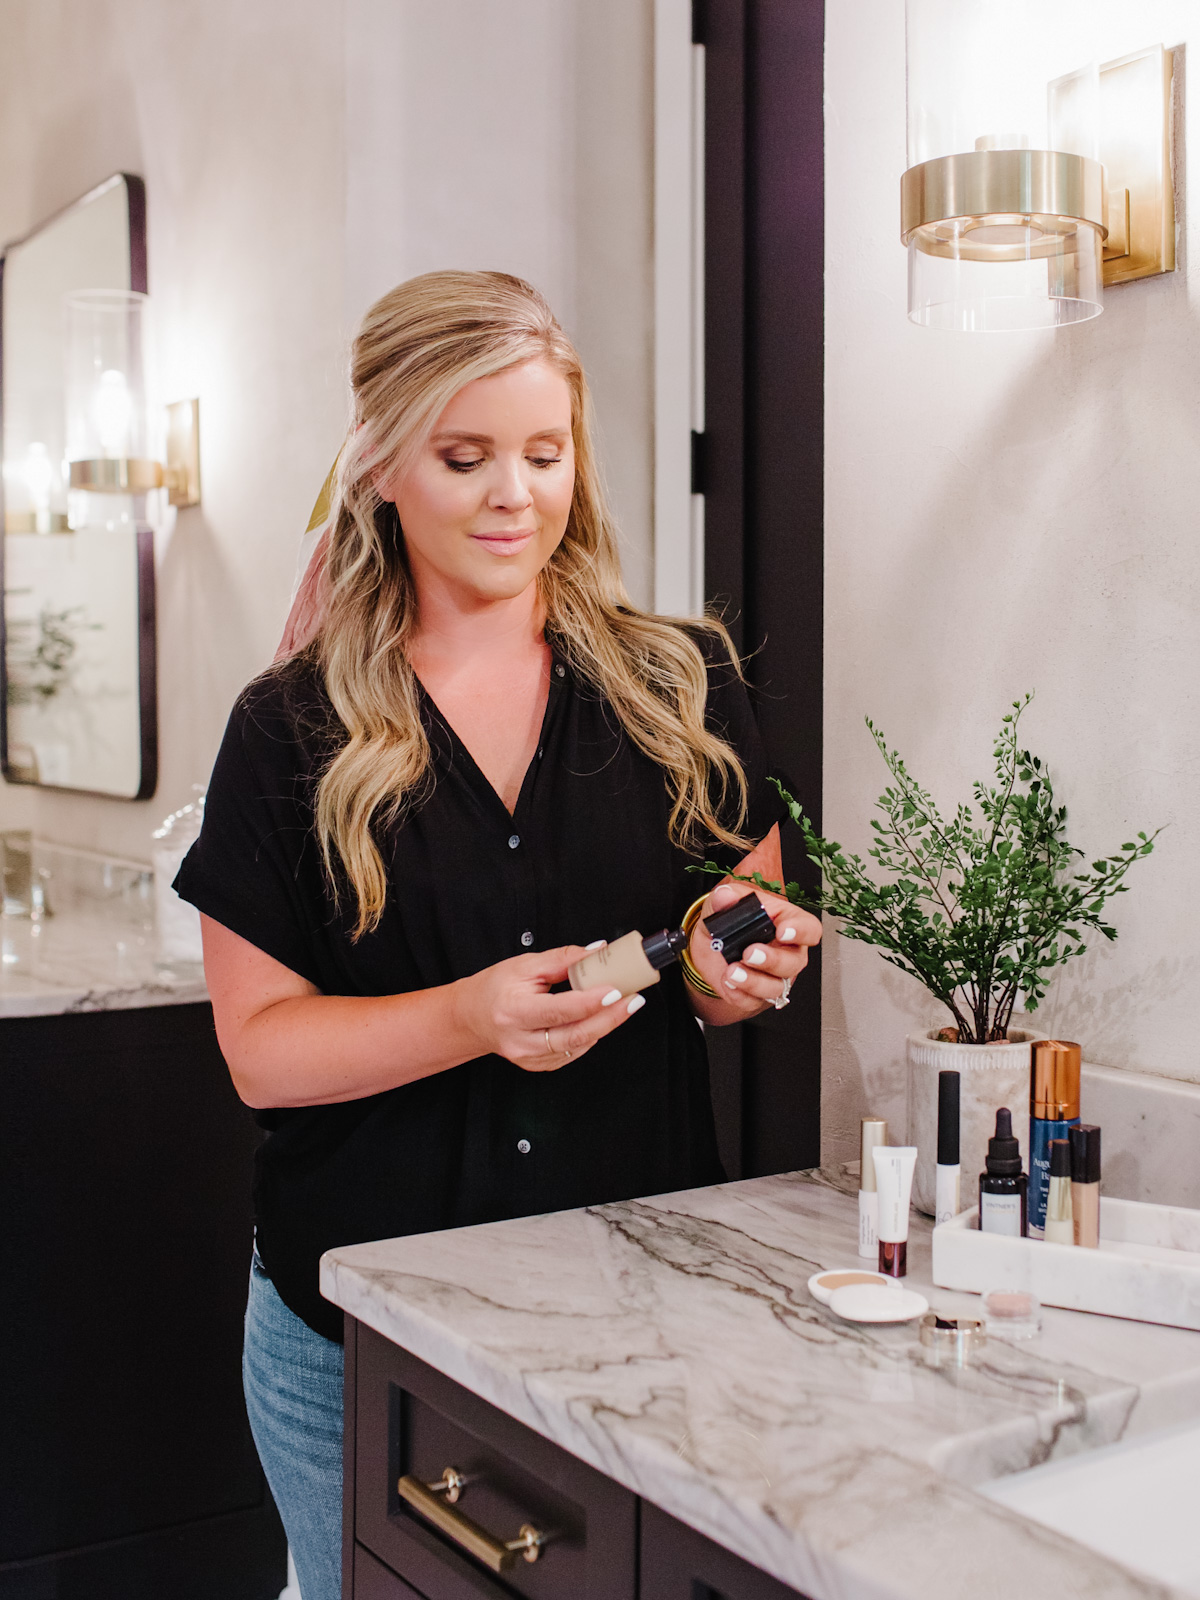 Cristin shares her favorite Nordstrom beauty products.